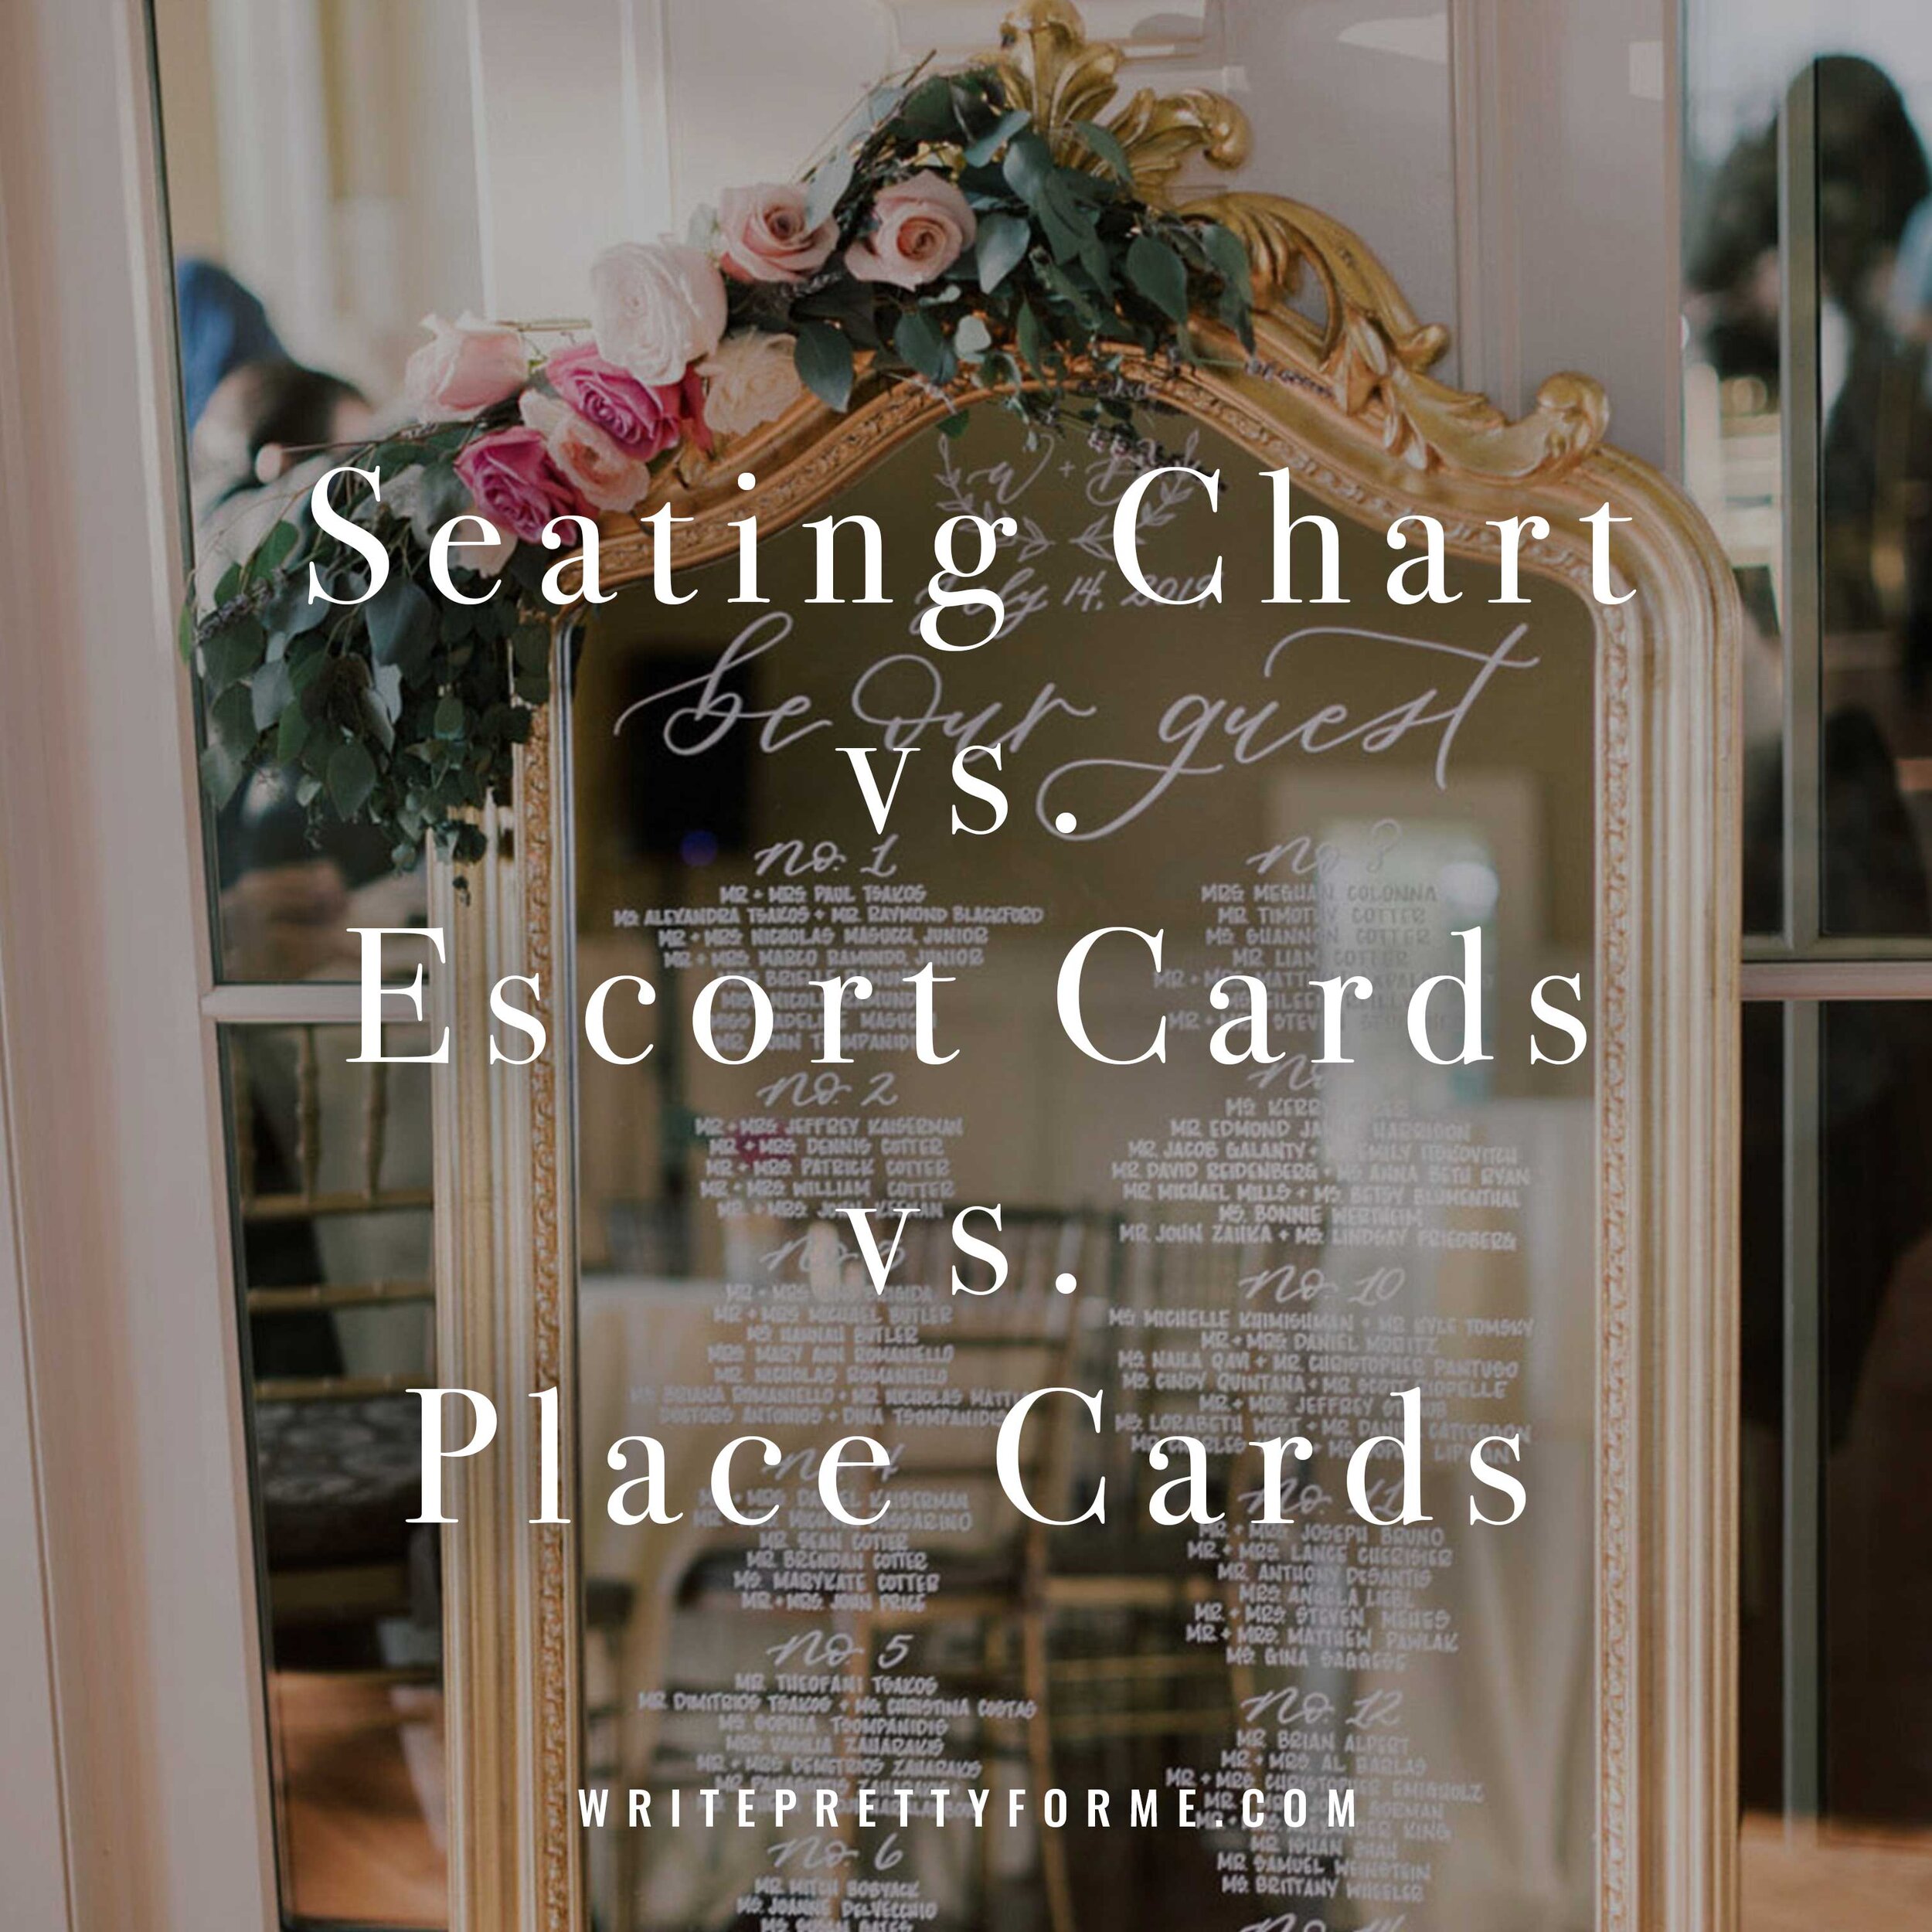 Seating-Chart-Escort-Cards-Place-Cards---Hoboken-NJ-Calligrapher---Write-Pretty-for-Me.jpg